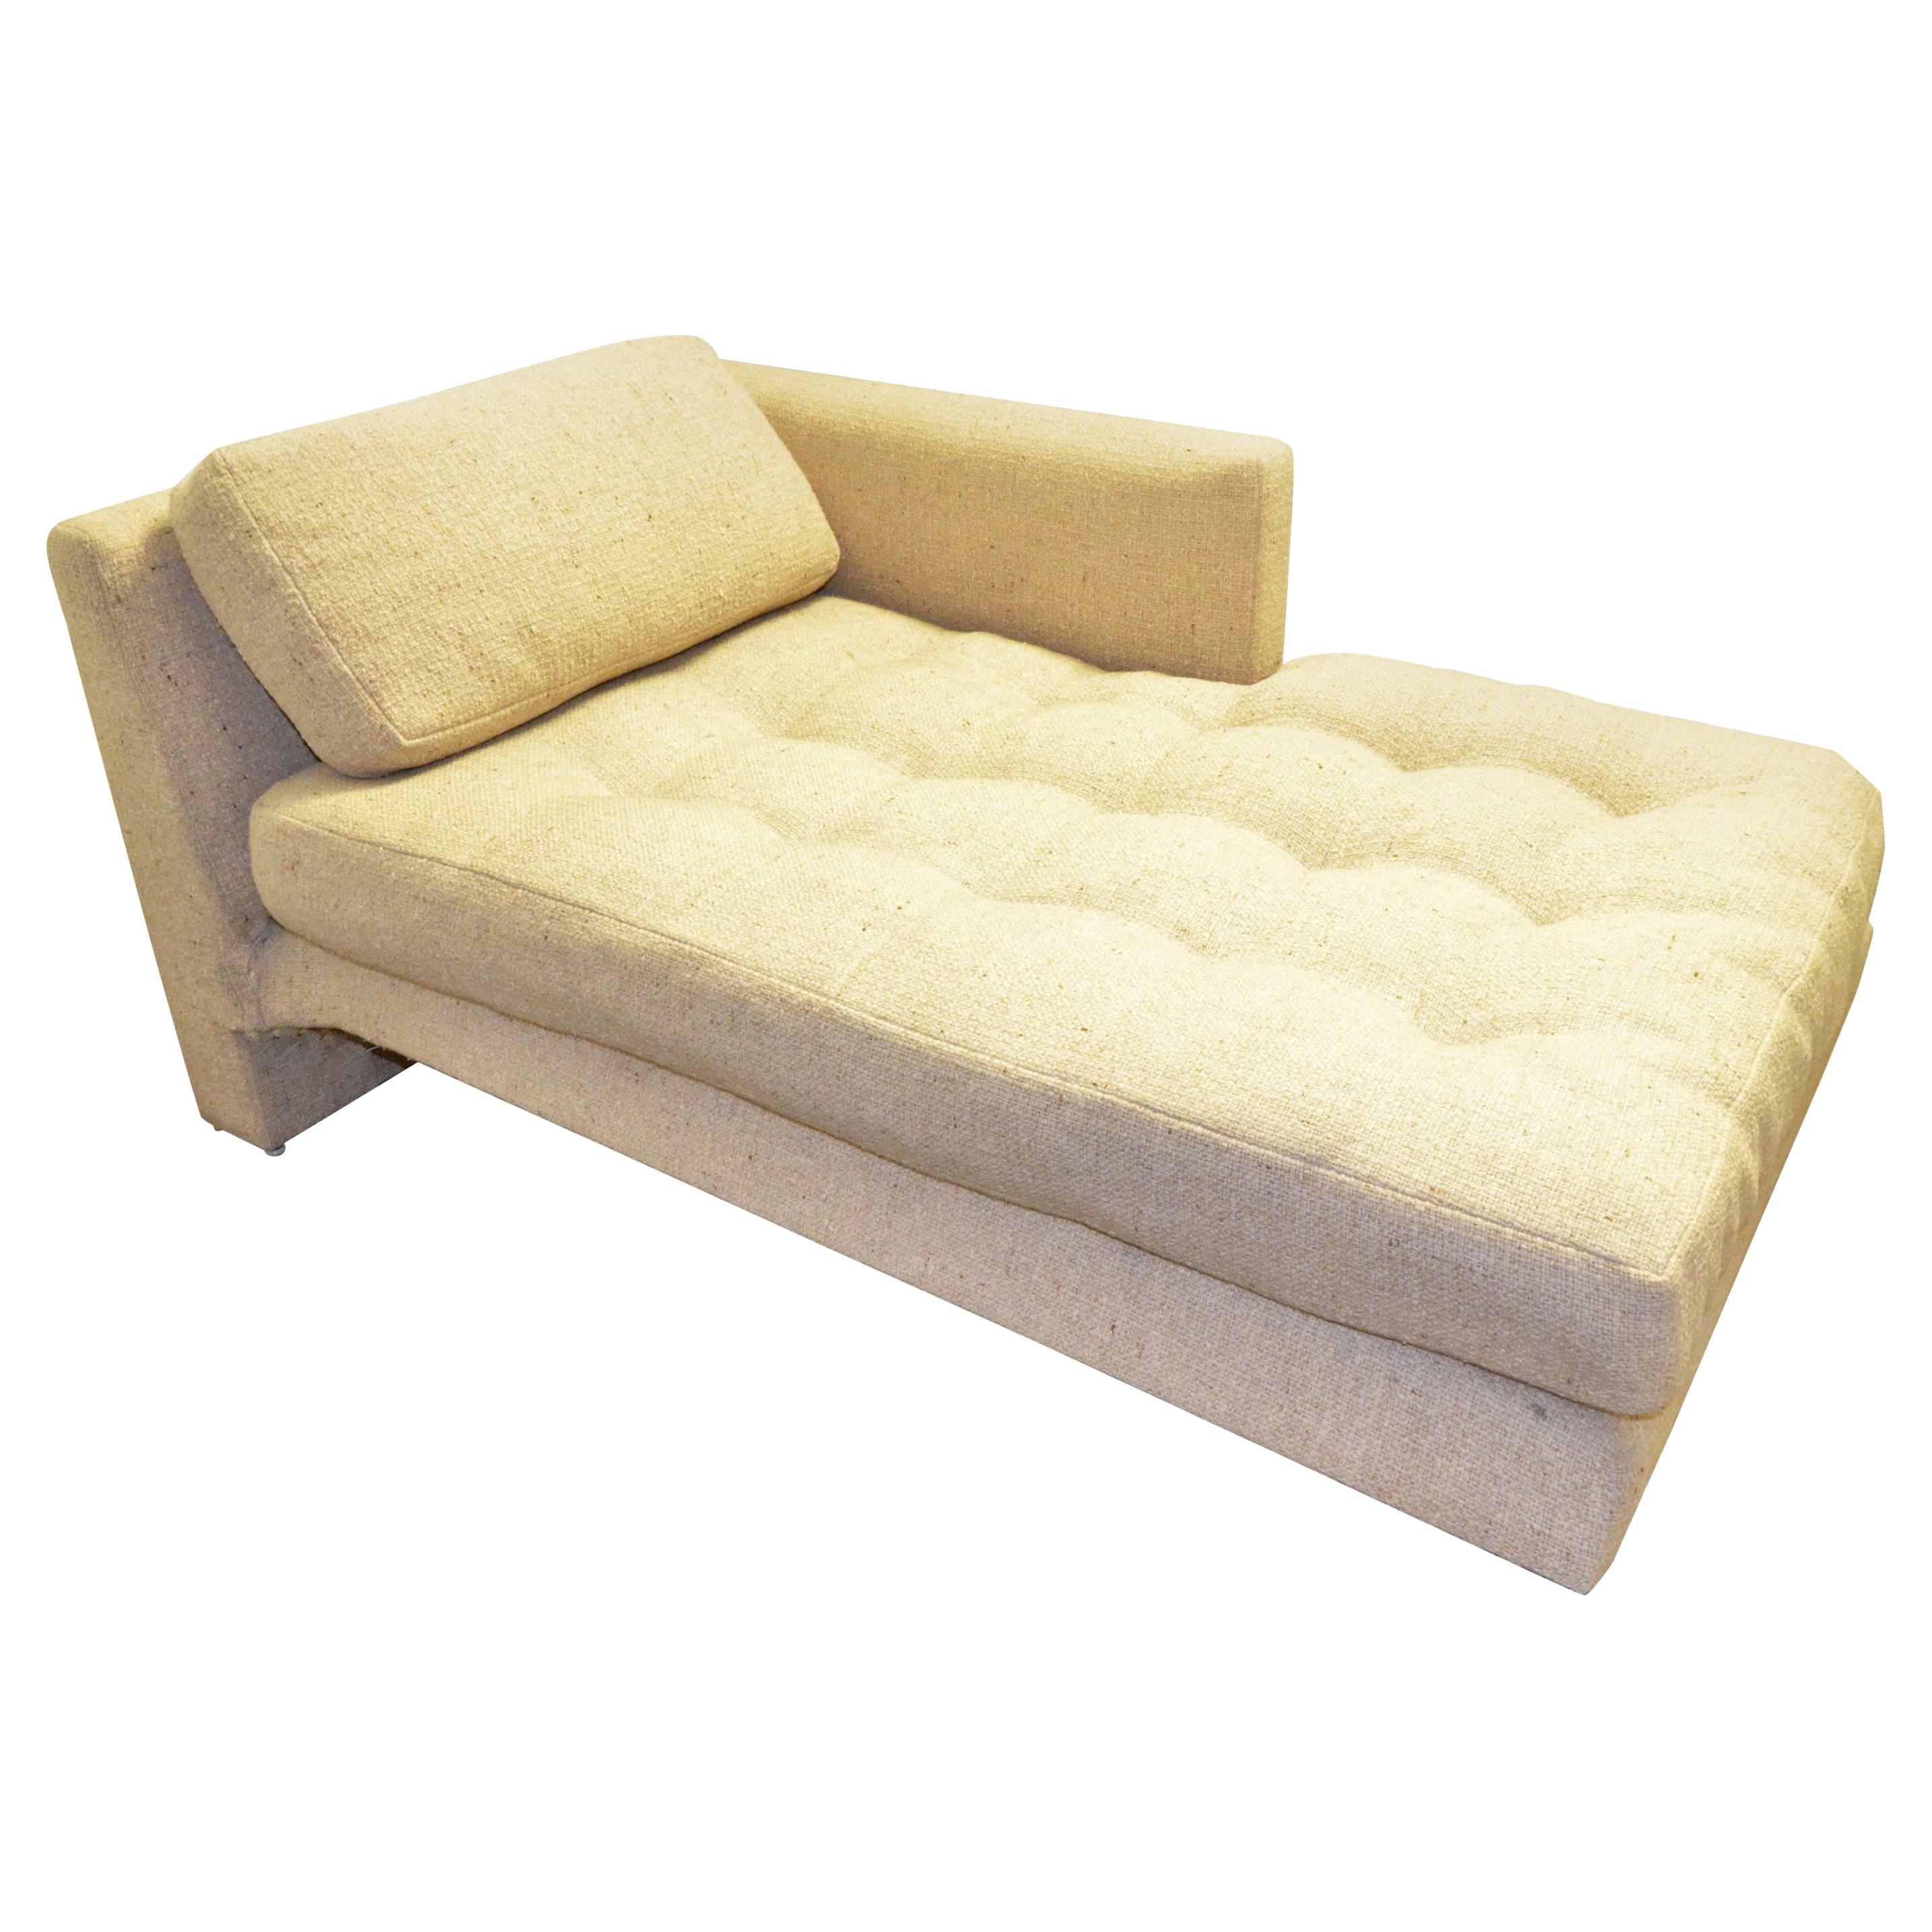 Vladimir Kagan Upholstered with Lit Lucite Base Omnibus Chaise Lounge and Pillow